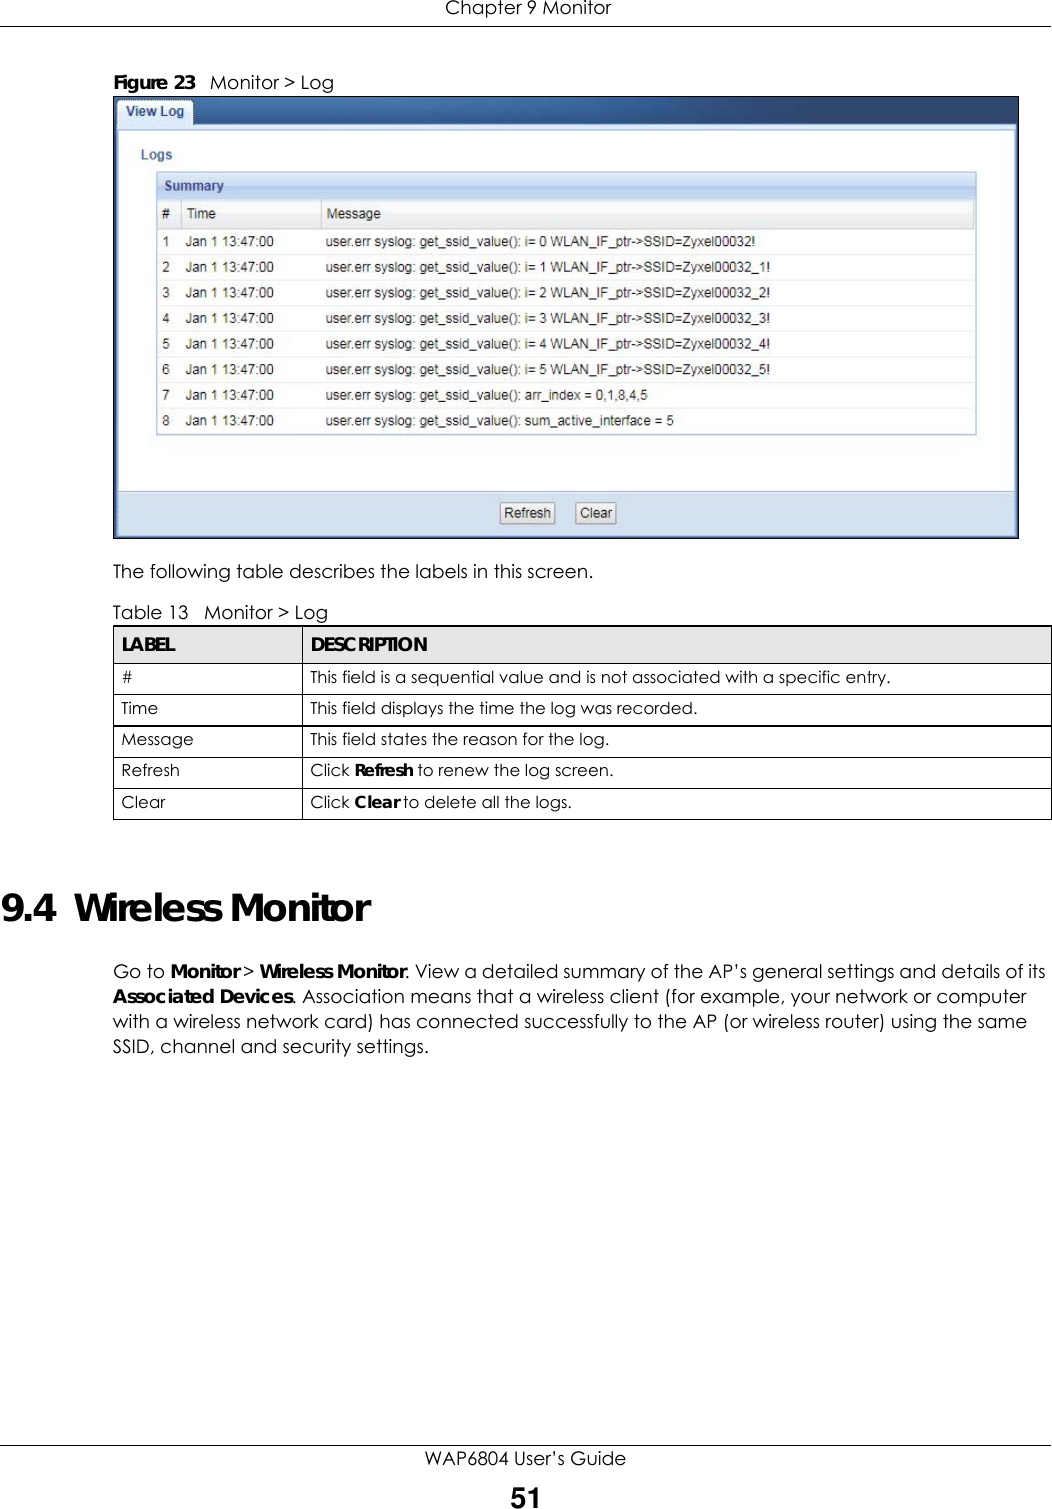  Chapter 9 MonitorWAP6804 User’s Guide51Figure 23   Monitor &gt; Log The following table describes the labels in this screen.9.4  Wireless Monitor     Go to Monitor &gt; Wireless Monitor. View a detailed summary of the AP’s general settings and details of its Associated Devices. Association means that a wireless client (for example, your network or computer with a wireless network card) has connected successfully to the AP (or wireless router) using the same SSID, channel and security settings.Table 13   Monitor &gt; LogLABEL DESCRIPTION#This field is a sequential value and is not associated with a specific entry.Time  This field displays the time the log was recorded. Message This field states the reason for the log.Refresh Click Refresh to renew the log screen. Clear Click Clear to delete all the logs. 